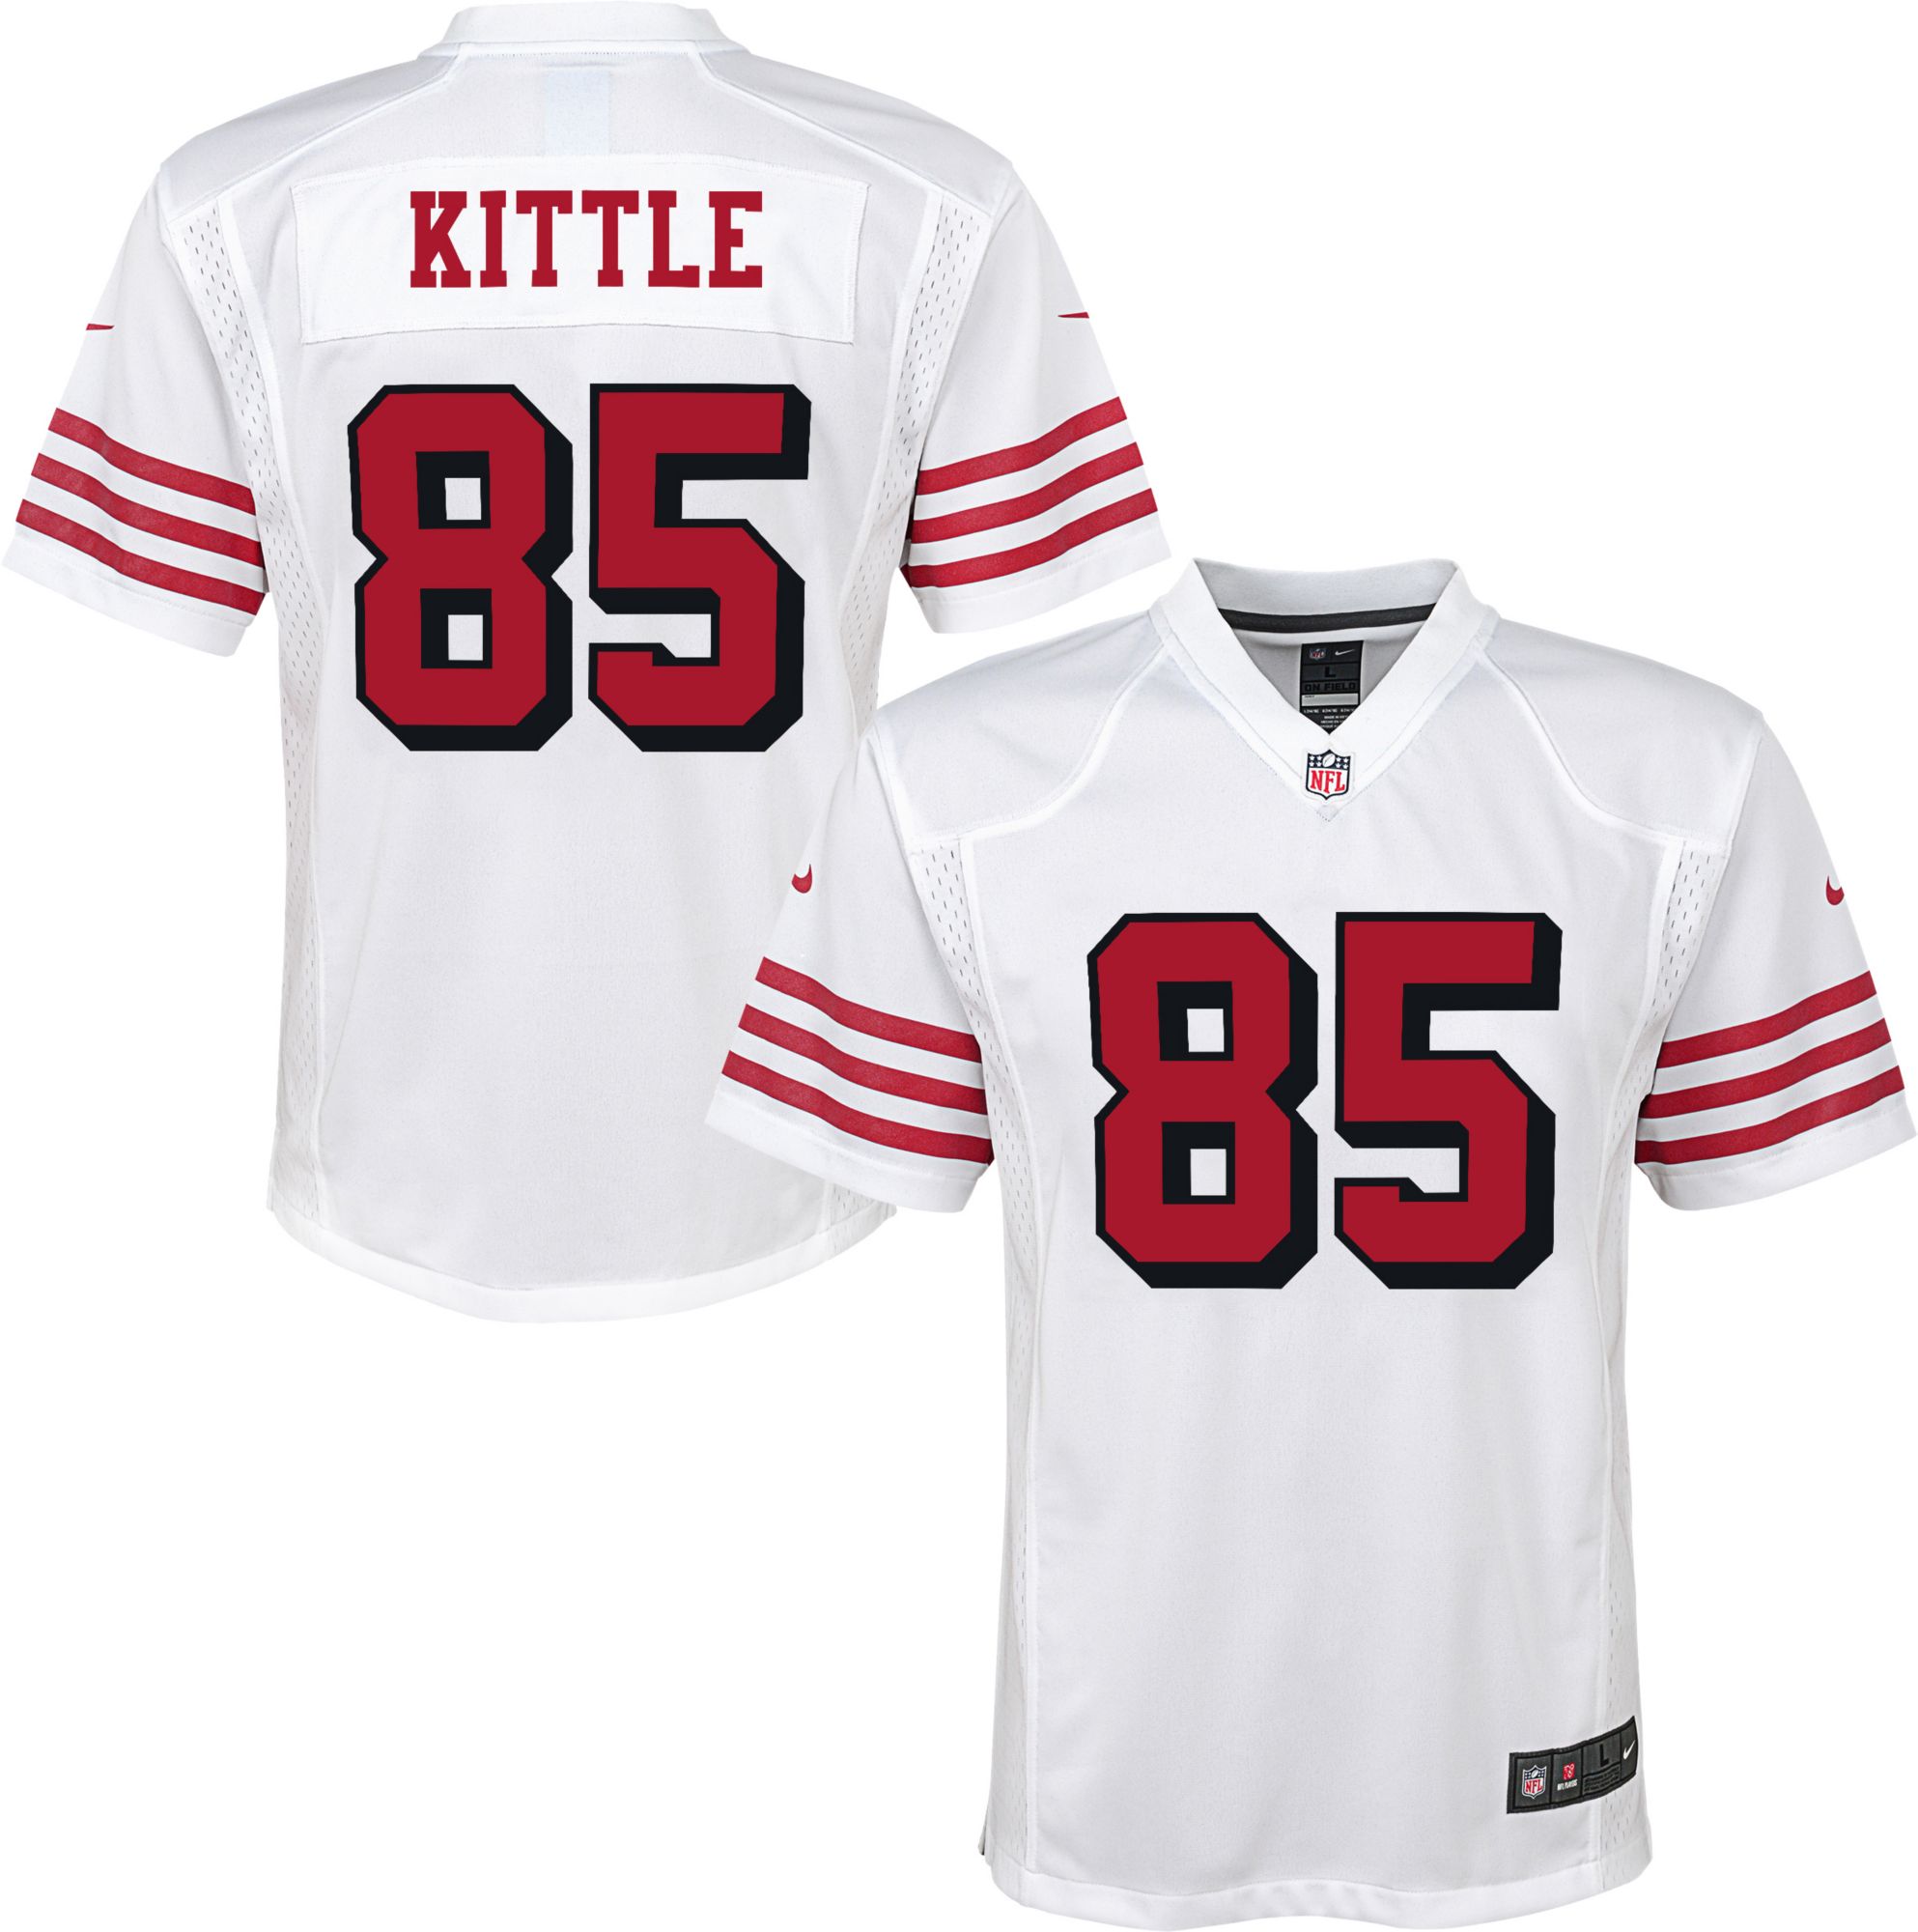 george kittle jersey white